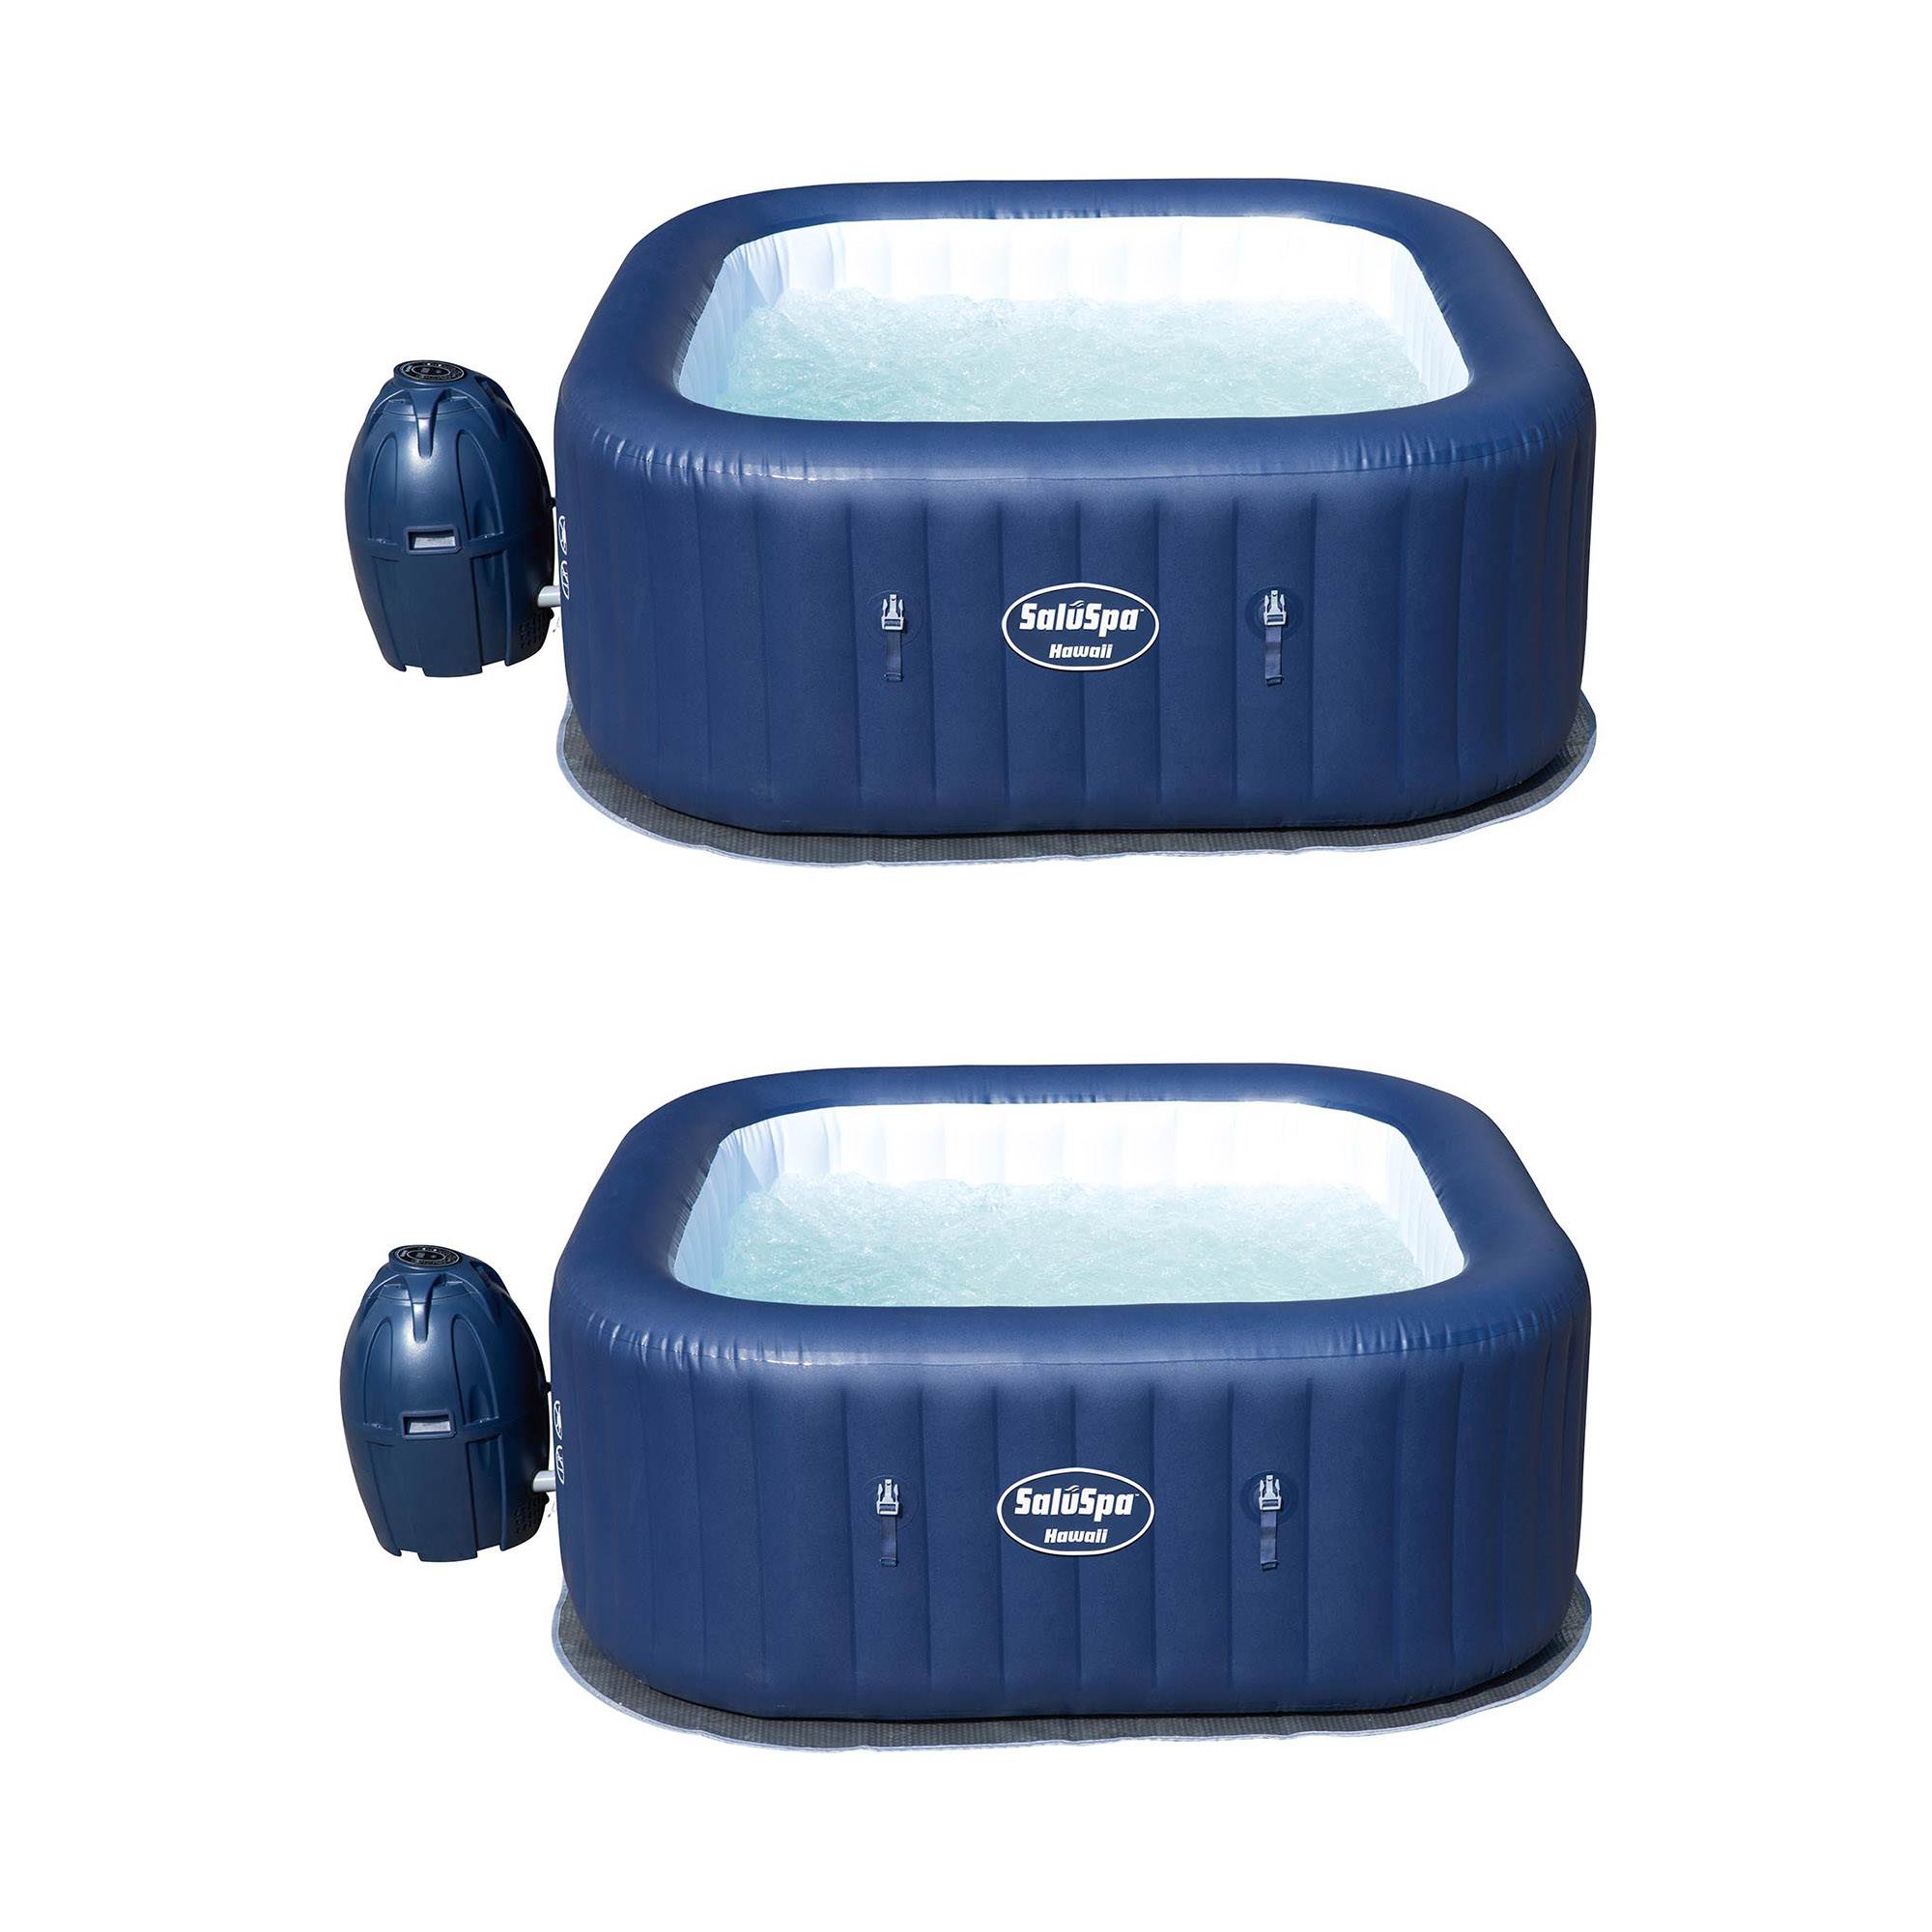 4-Person Hot Square Tub Inflatable Bestway at